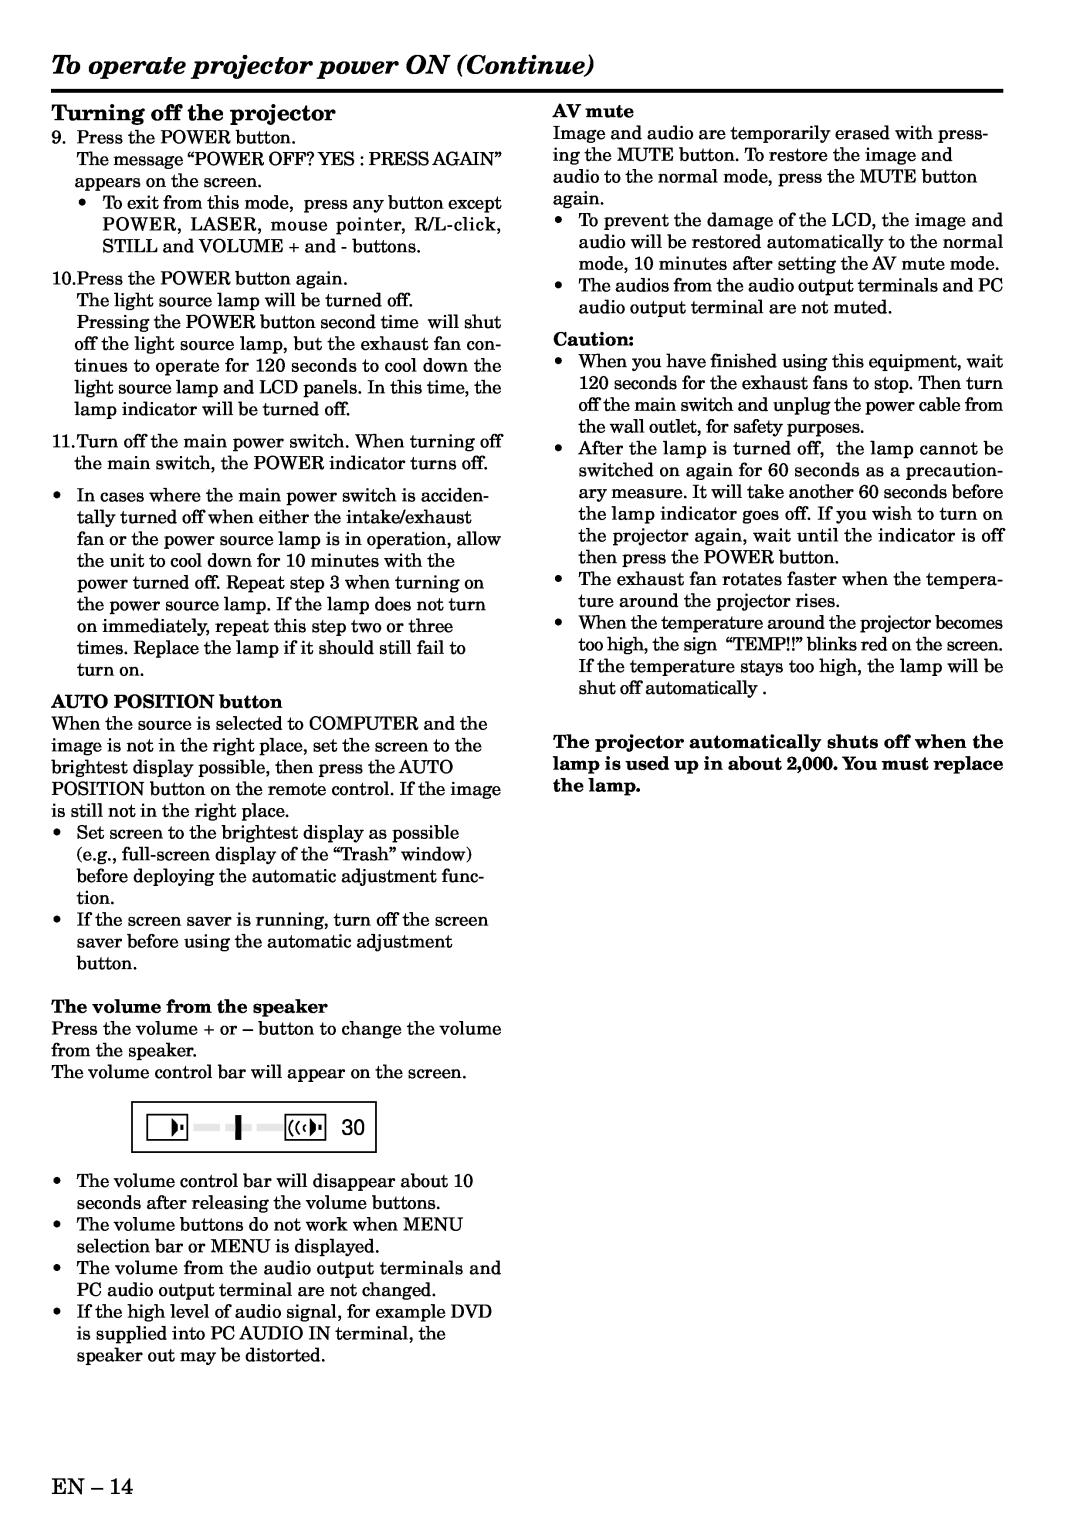 Mitsubishi Electronics S290U user manual To operate projector power ON Continue, Turning off the projector 